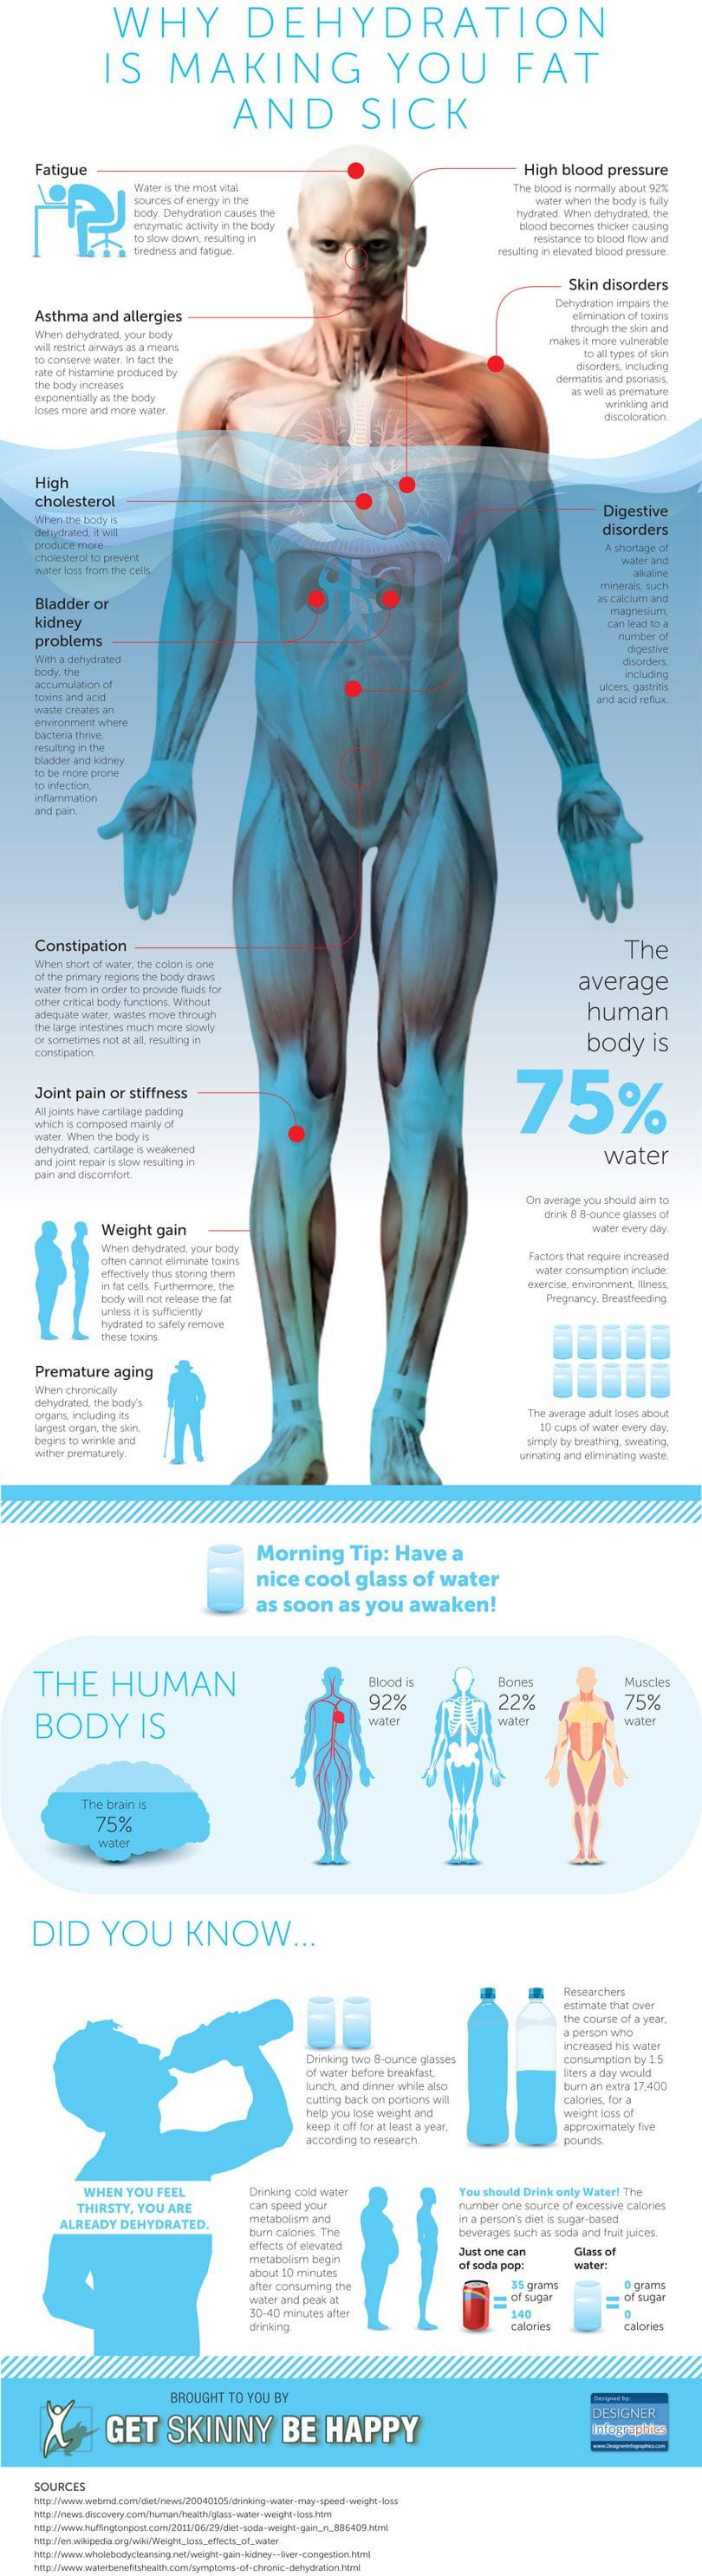 Why Dehydration Is Making You Fat And Sick Infographic